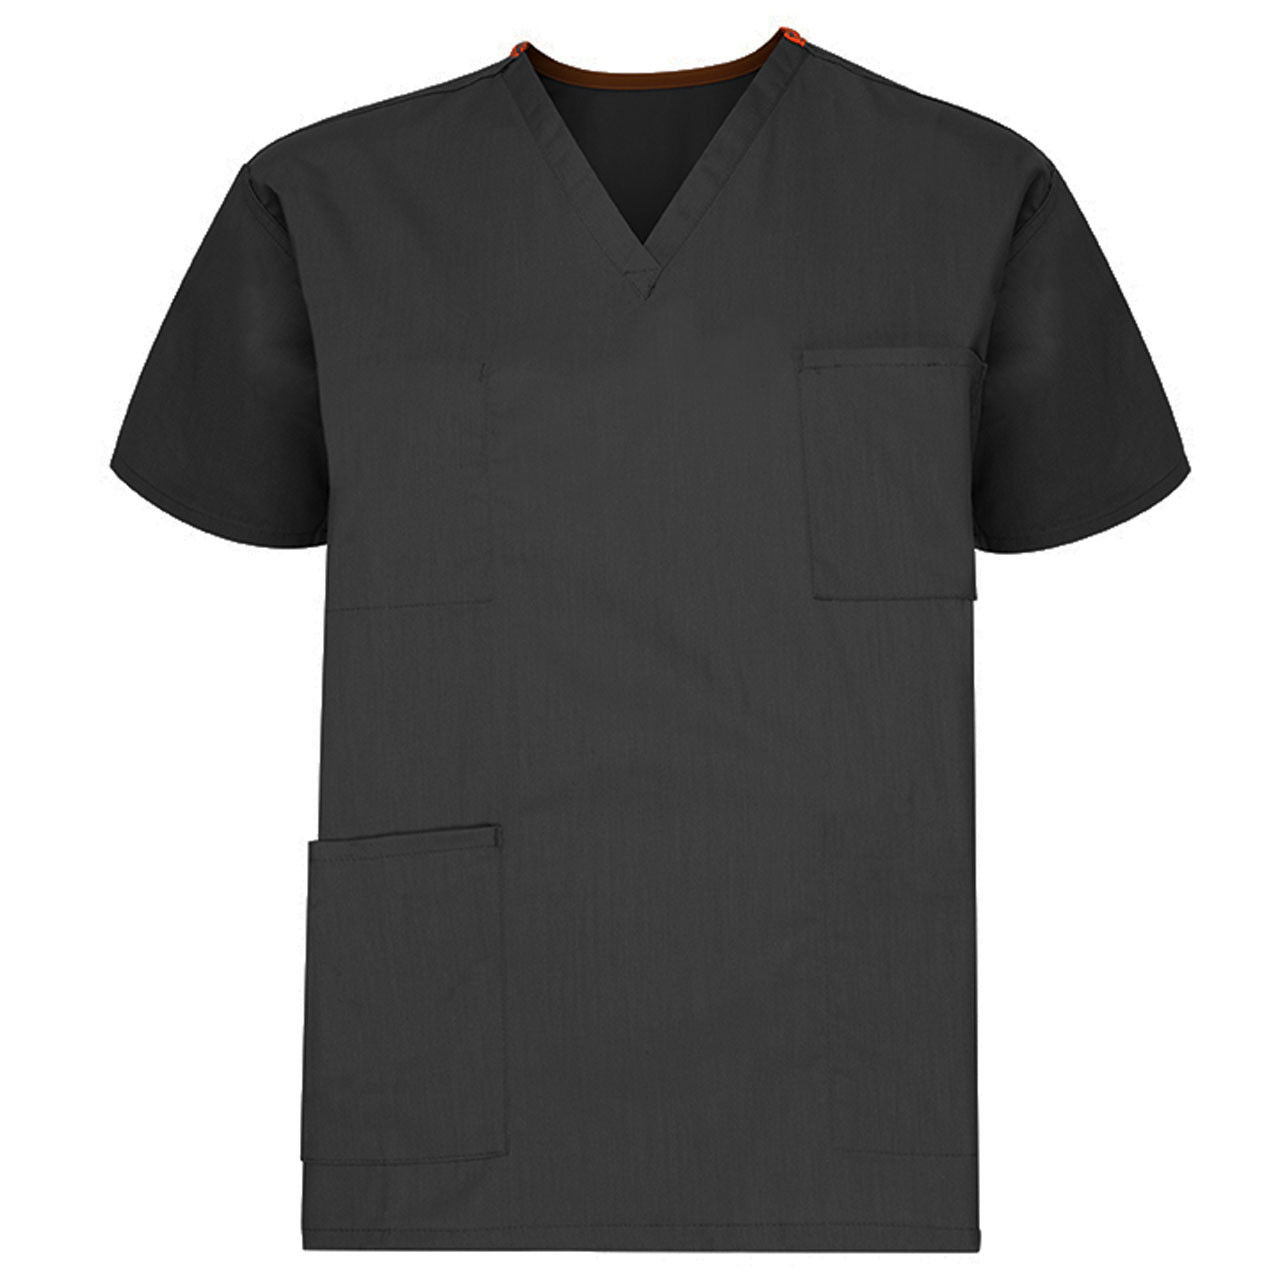 What color options are offered for the reversible scrubs in the Unisex Scrub Top collection?